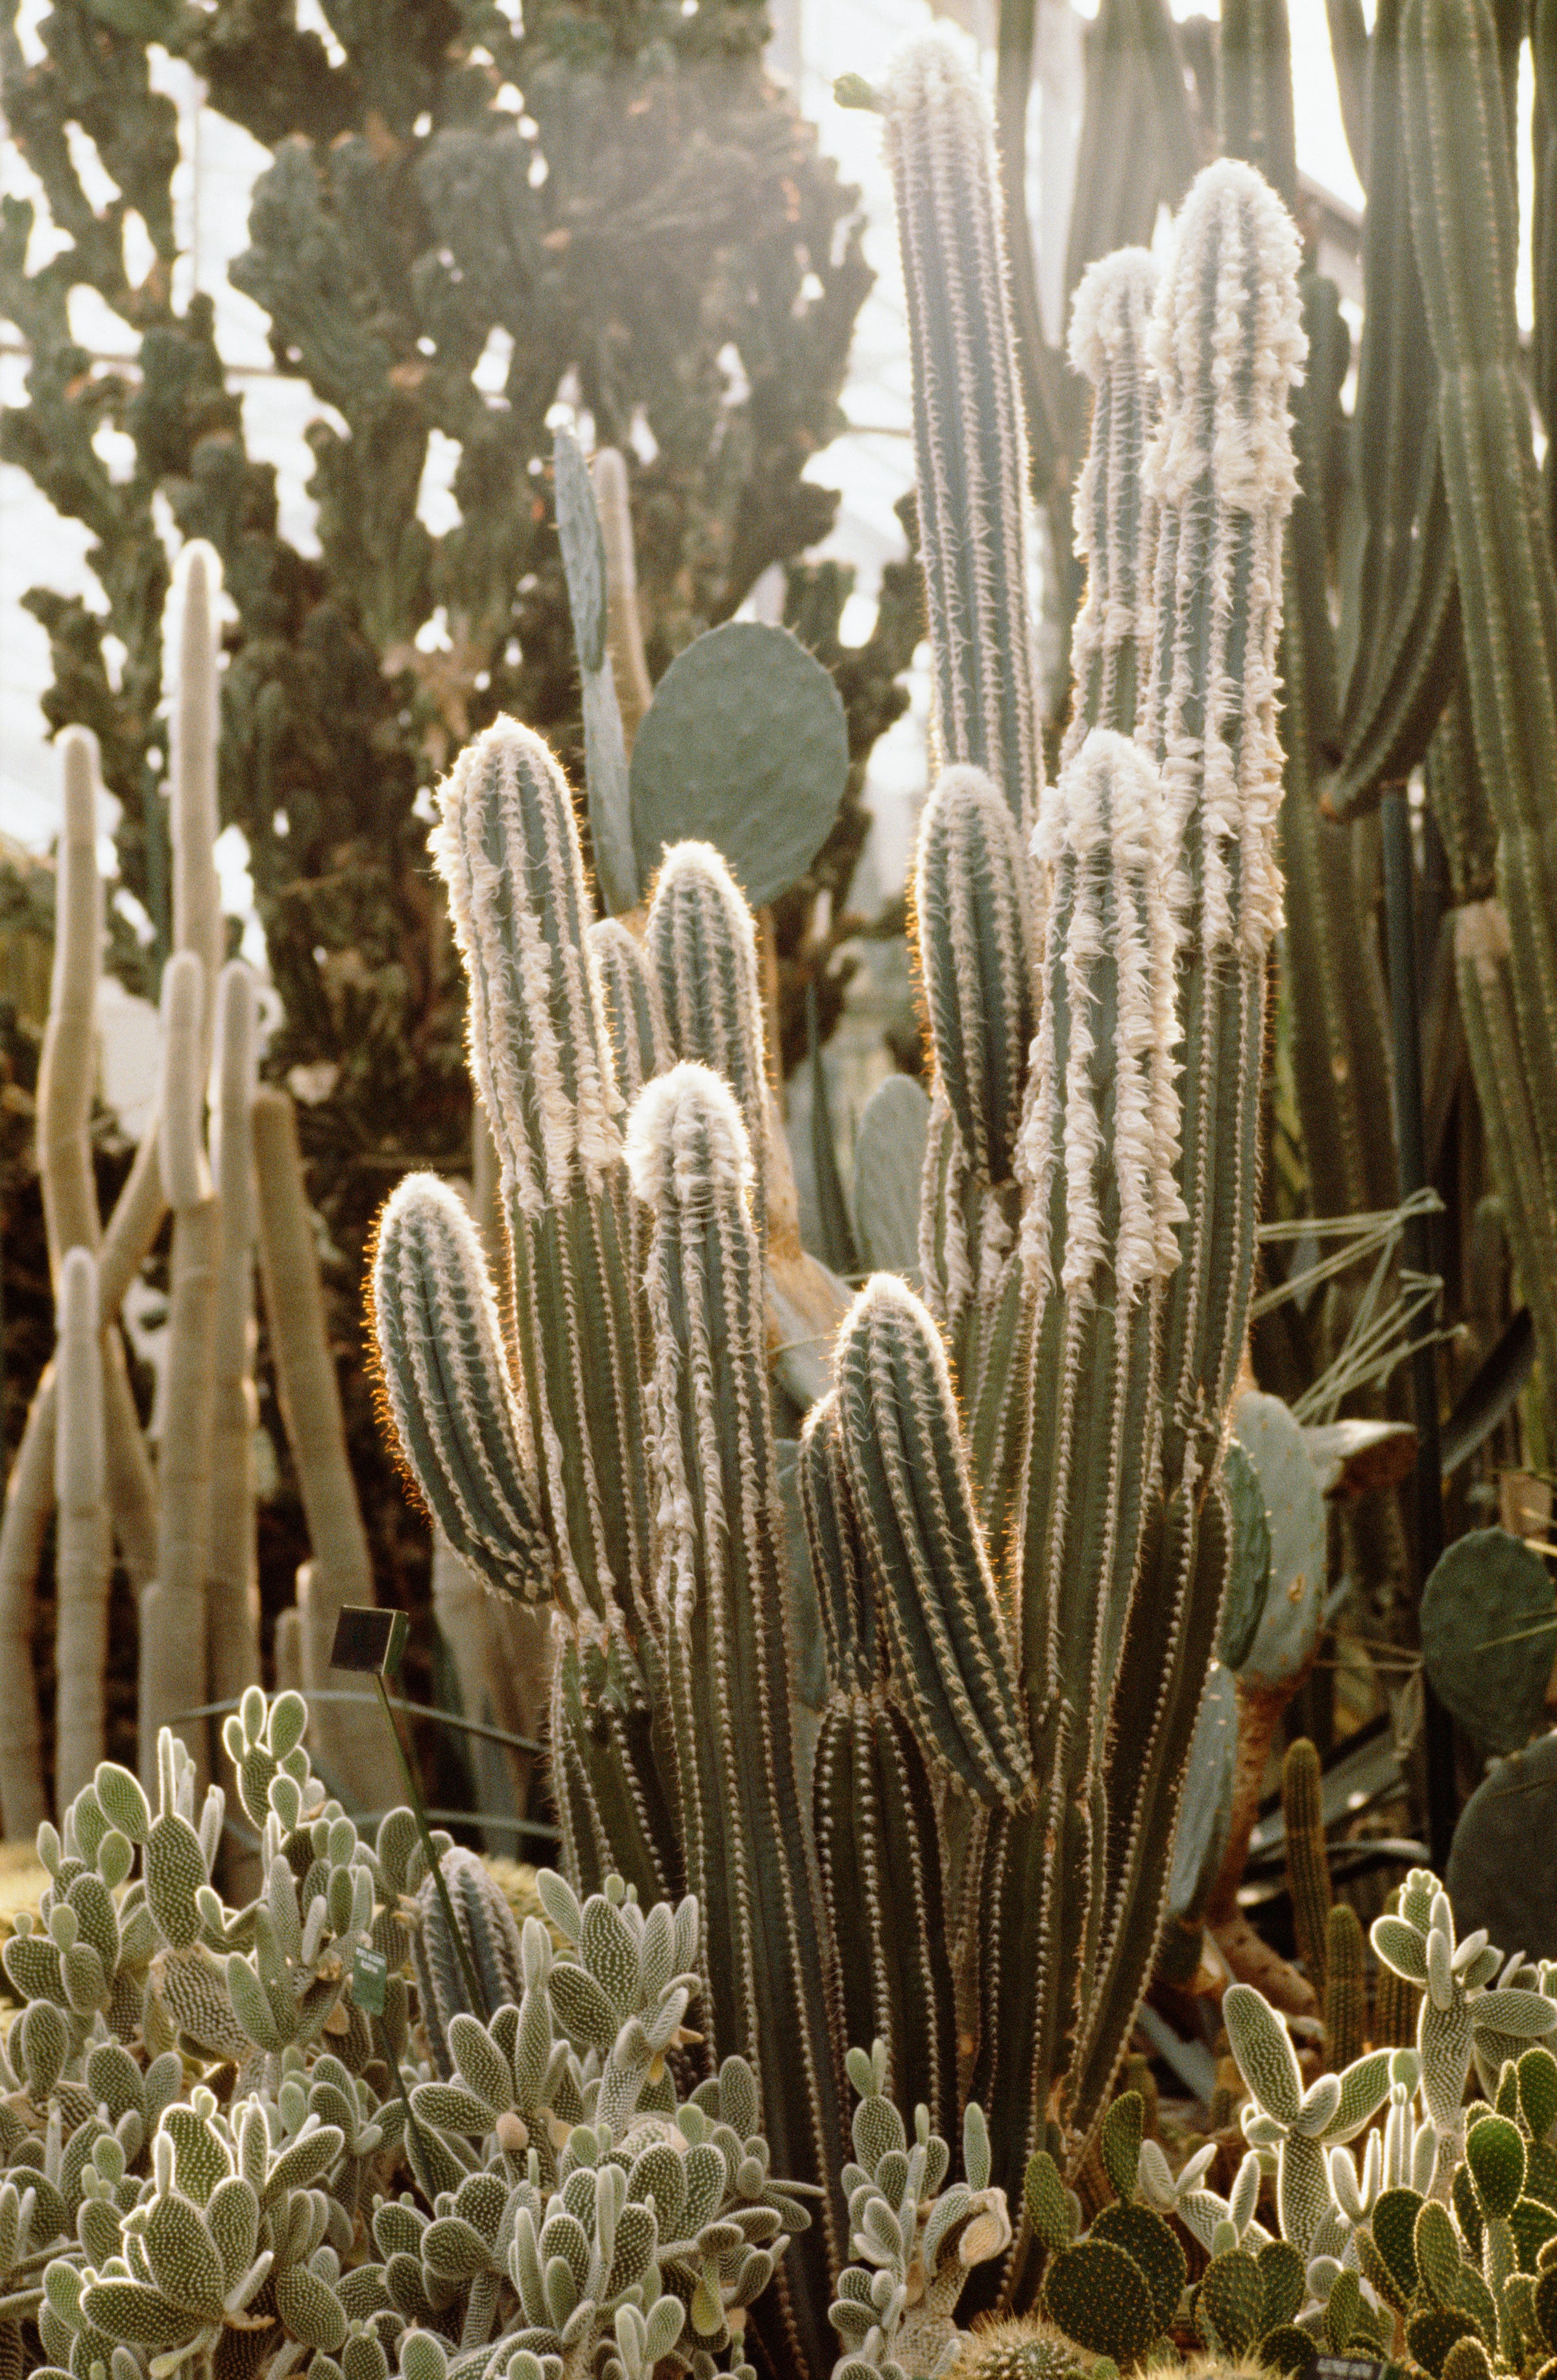 8. Can I Find Rare Or Exotic Cacti In Local Stores?